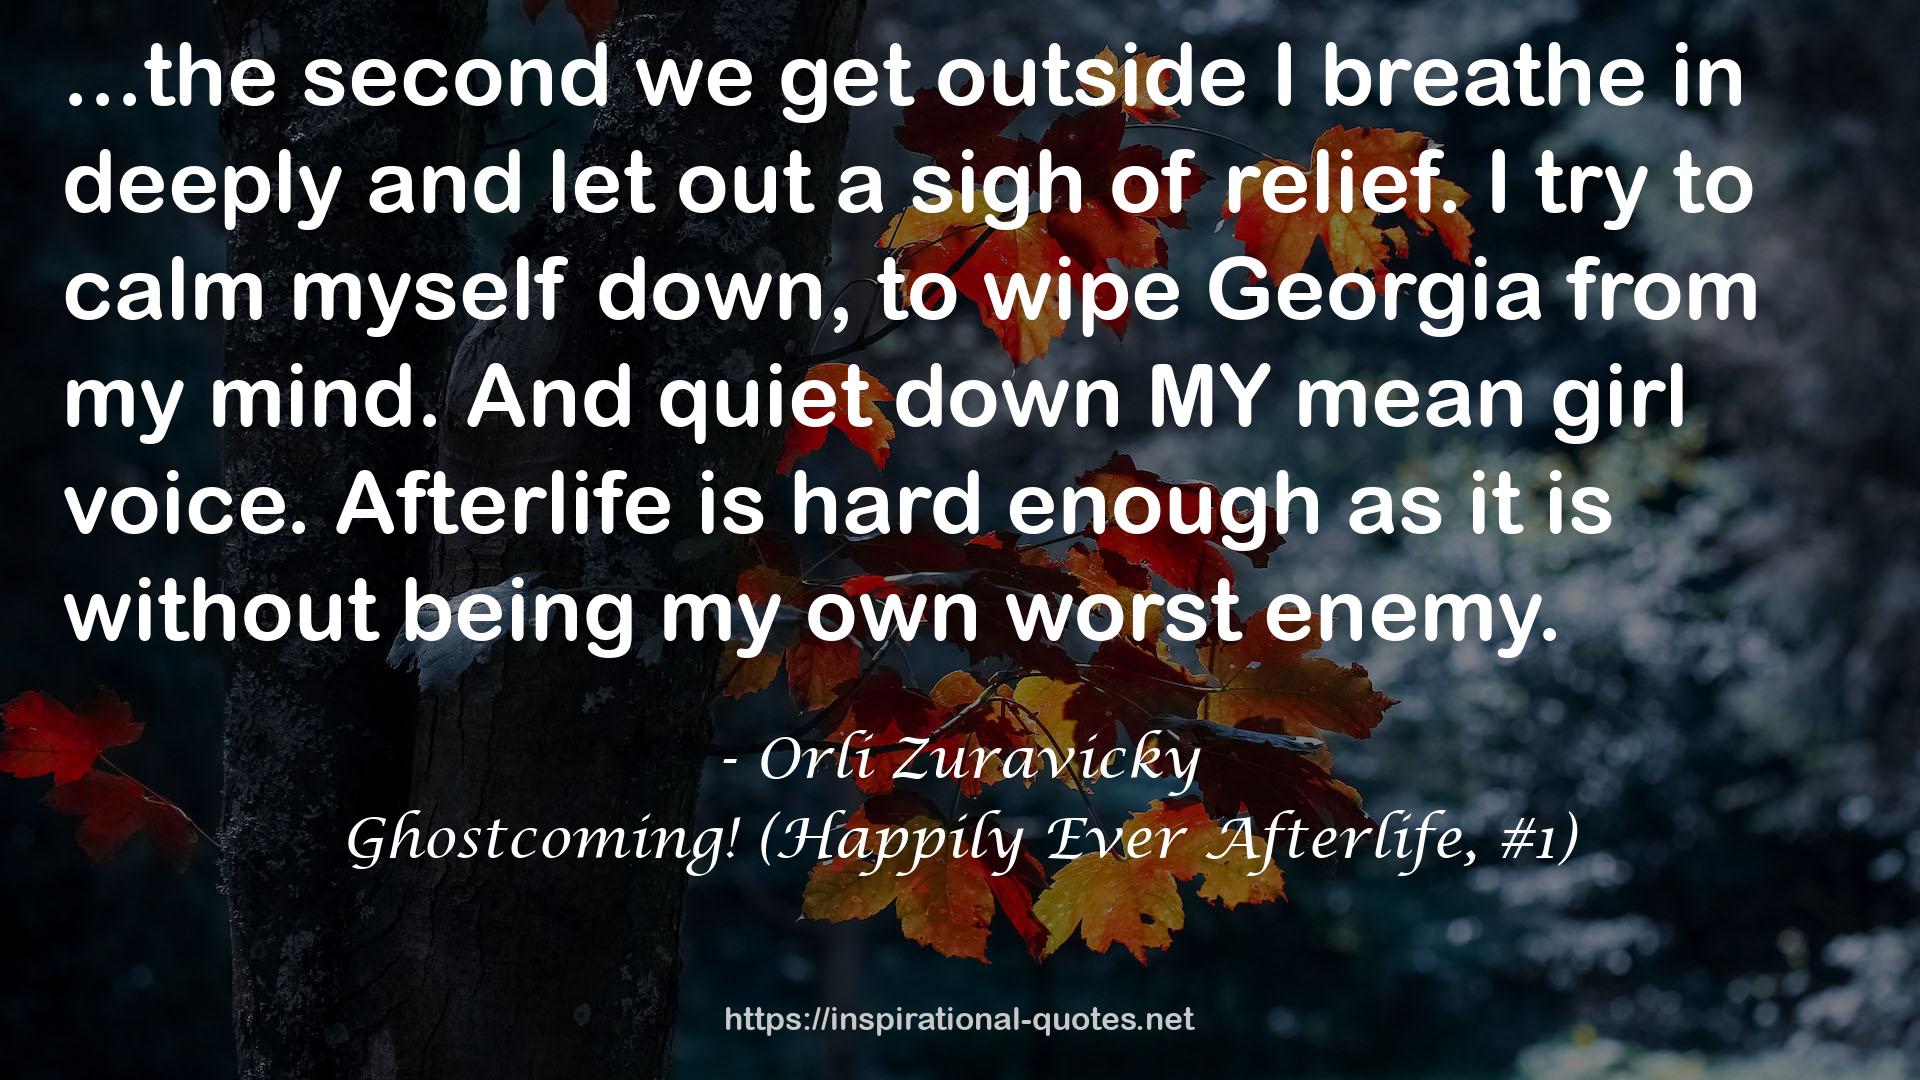 Ghostcoming! (Happily Ever Afterlife, #1) QUOTES